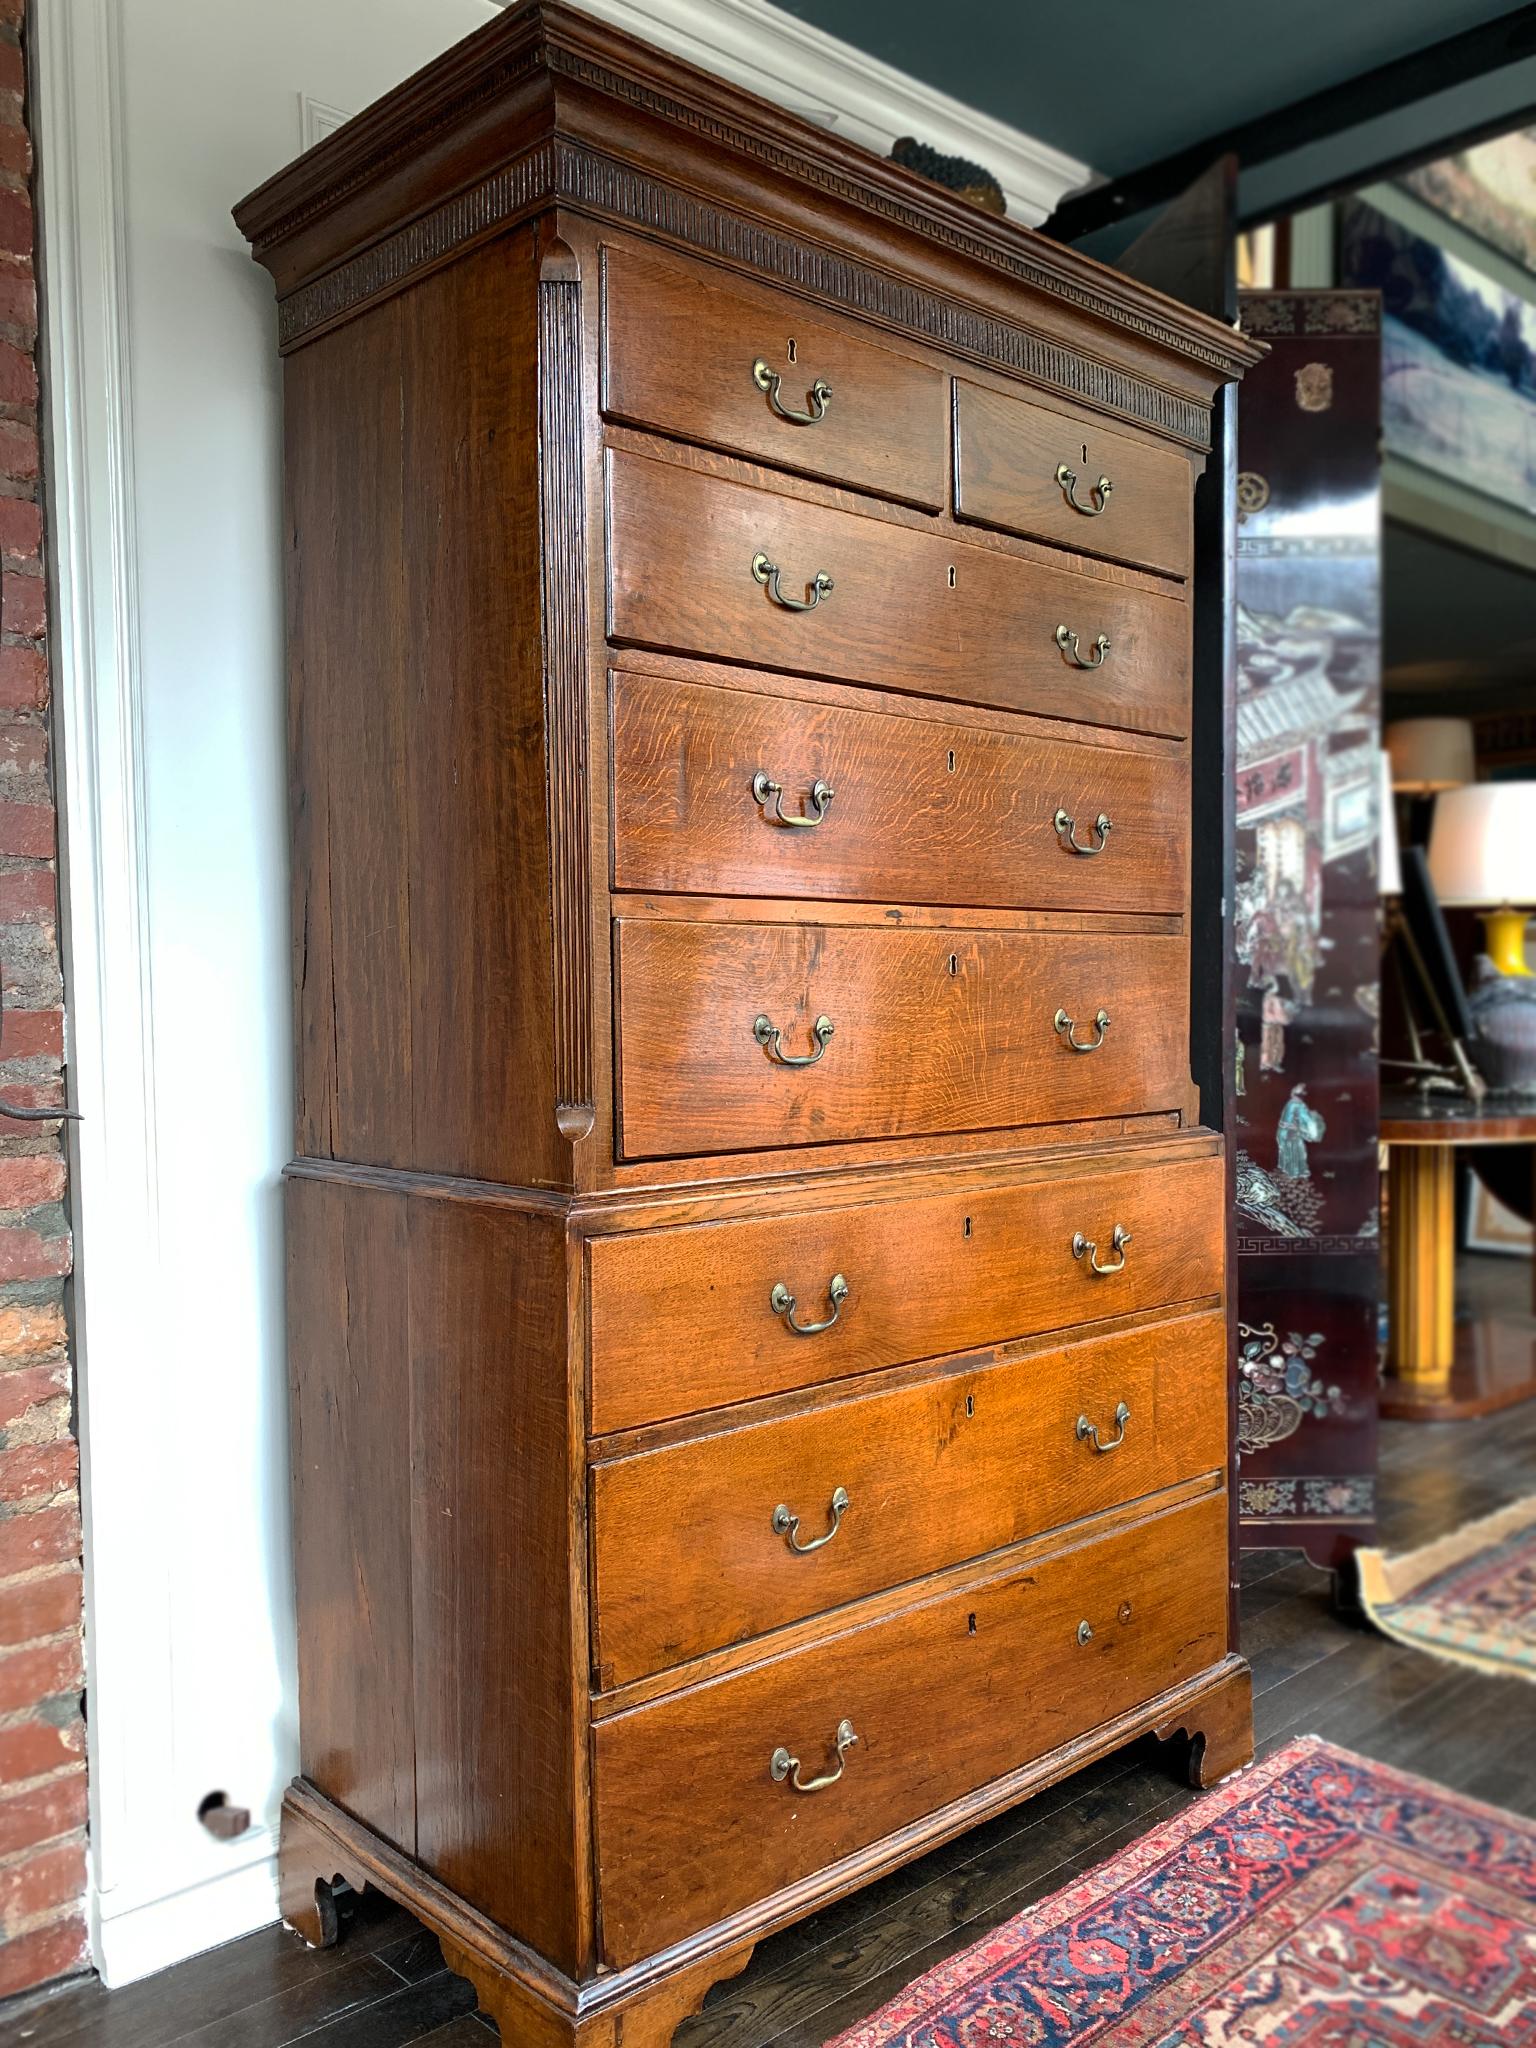 Georgian chest-on-chest handcrafted from oak in the Early 19th century. The upper chest is constructed with two small top drawers and three full-length drawers, while the bottom chest is constructed with three full-length drawers and bracket feet.